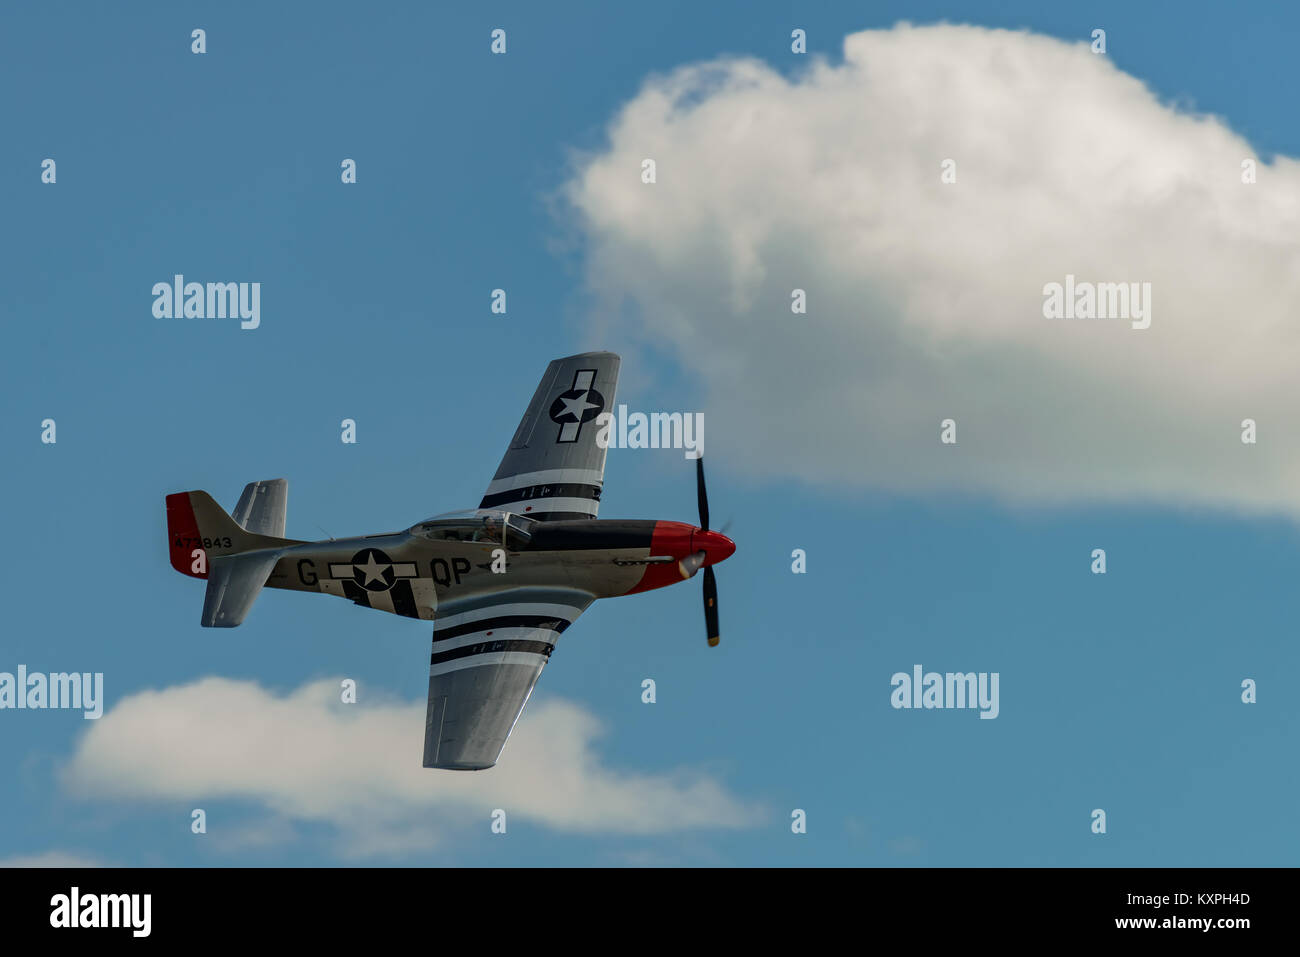 READING, PA - JUNE 3, 2017: NORTH AMERICAN P-51D 'MUSTANG' 'RED NOSE' in flight during World War II reenactment at Mid-Atlantic Air Museum Stock Photo